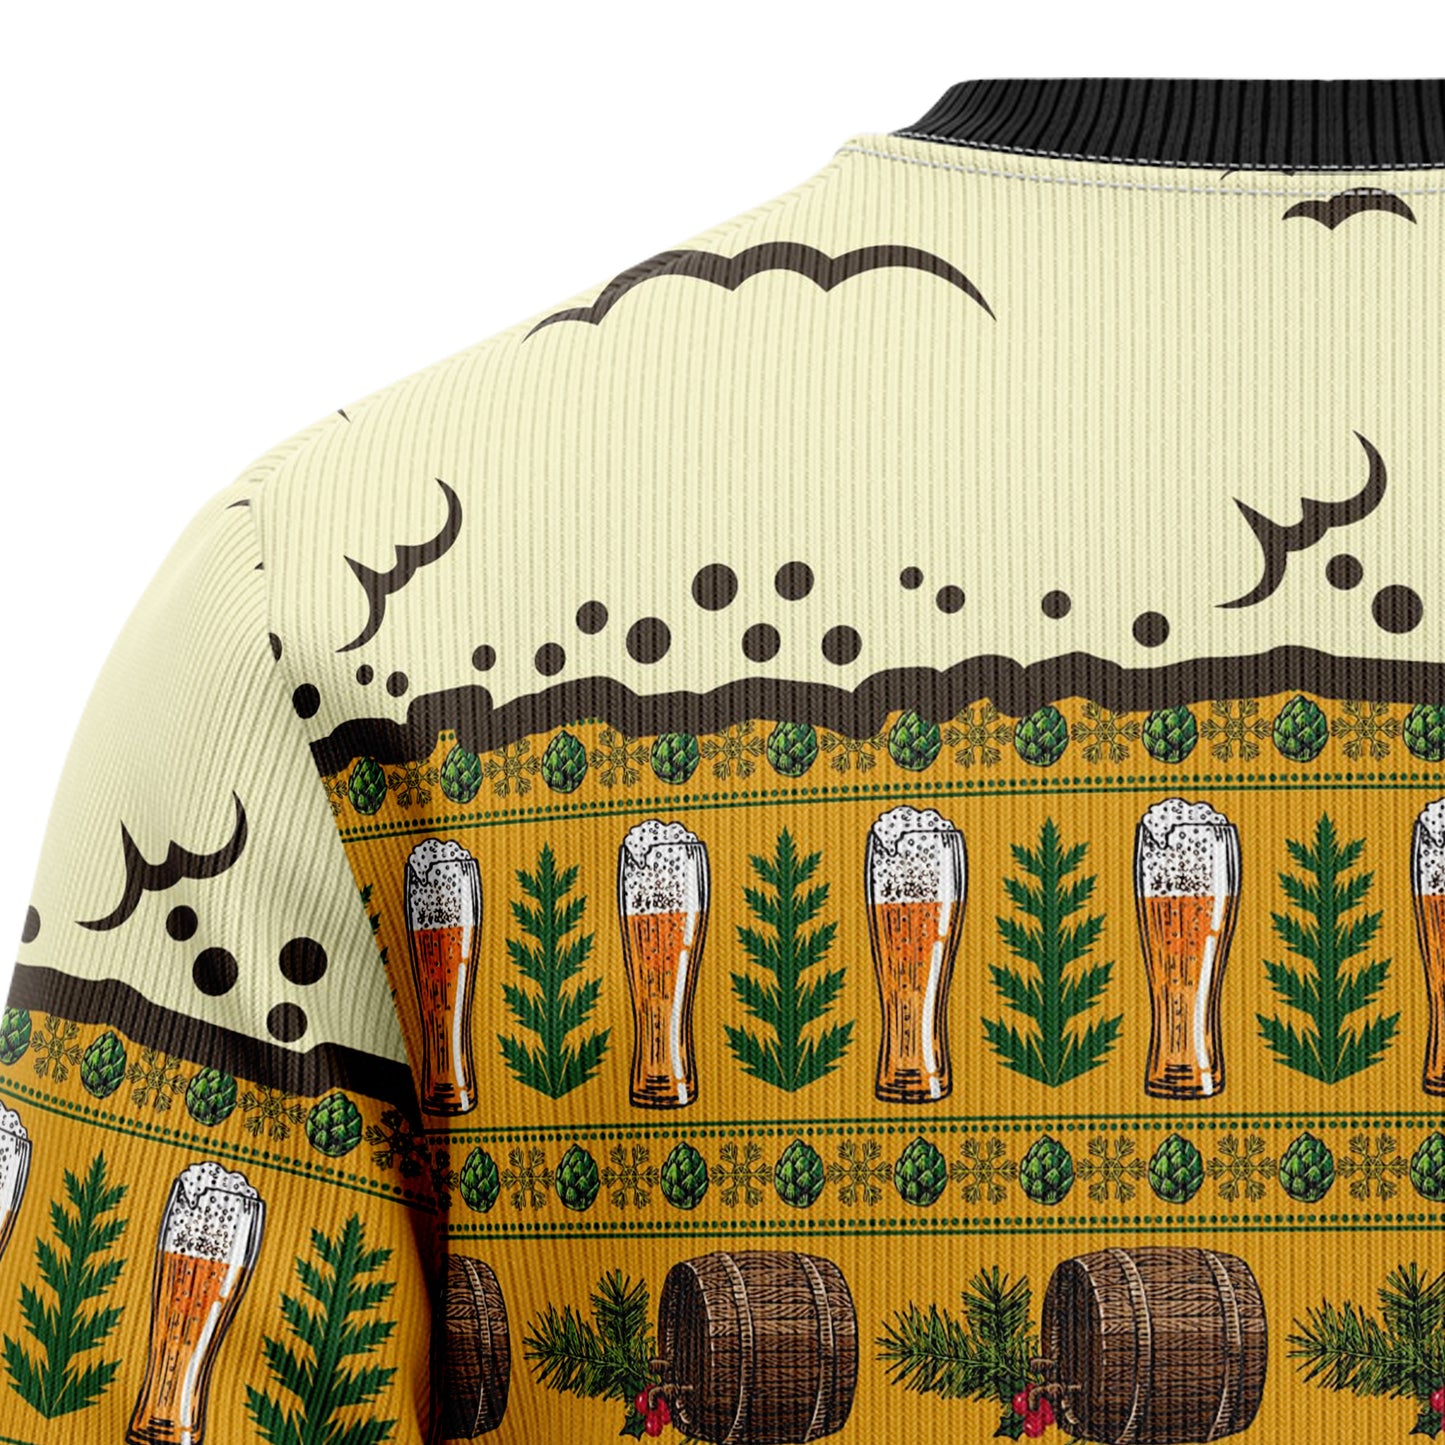 Christmas Most Wonderful Time For Beer HZ102604 Ugly Christmas Sweater